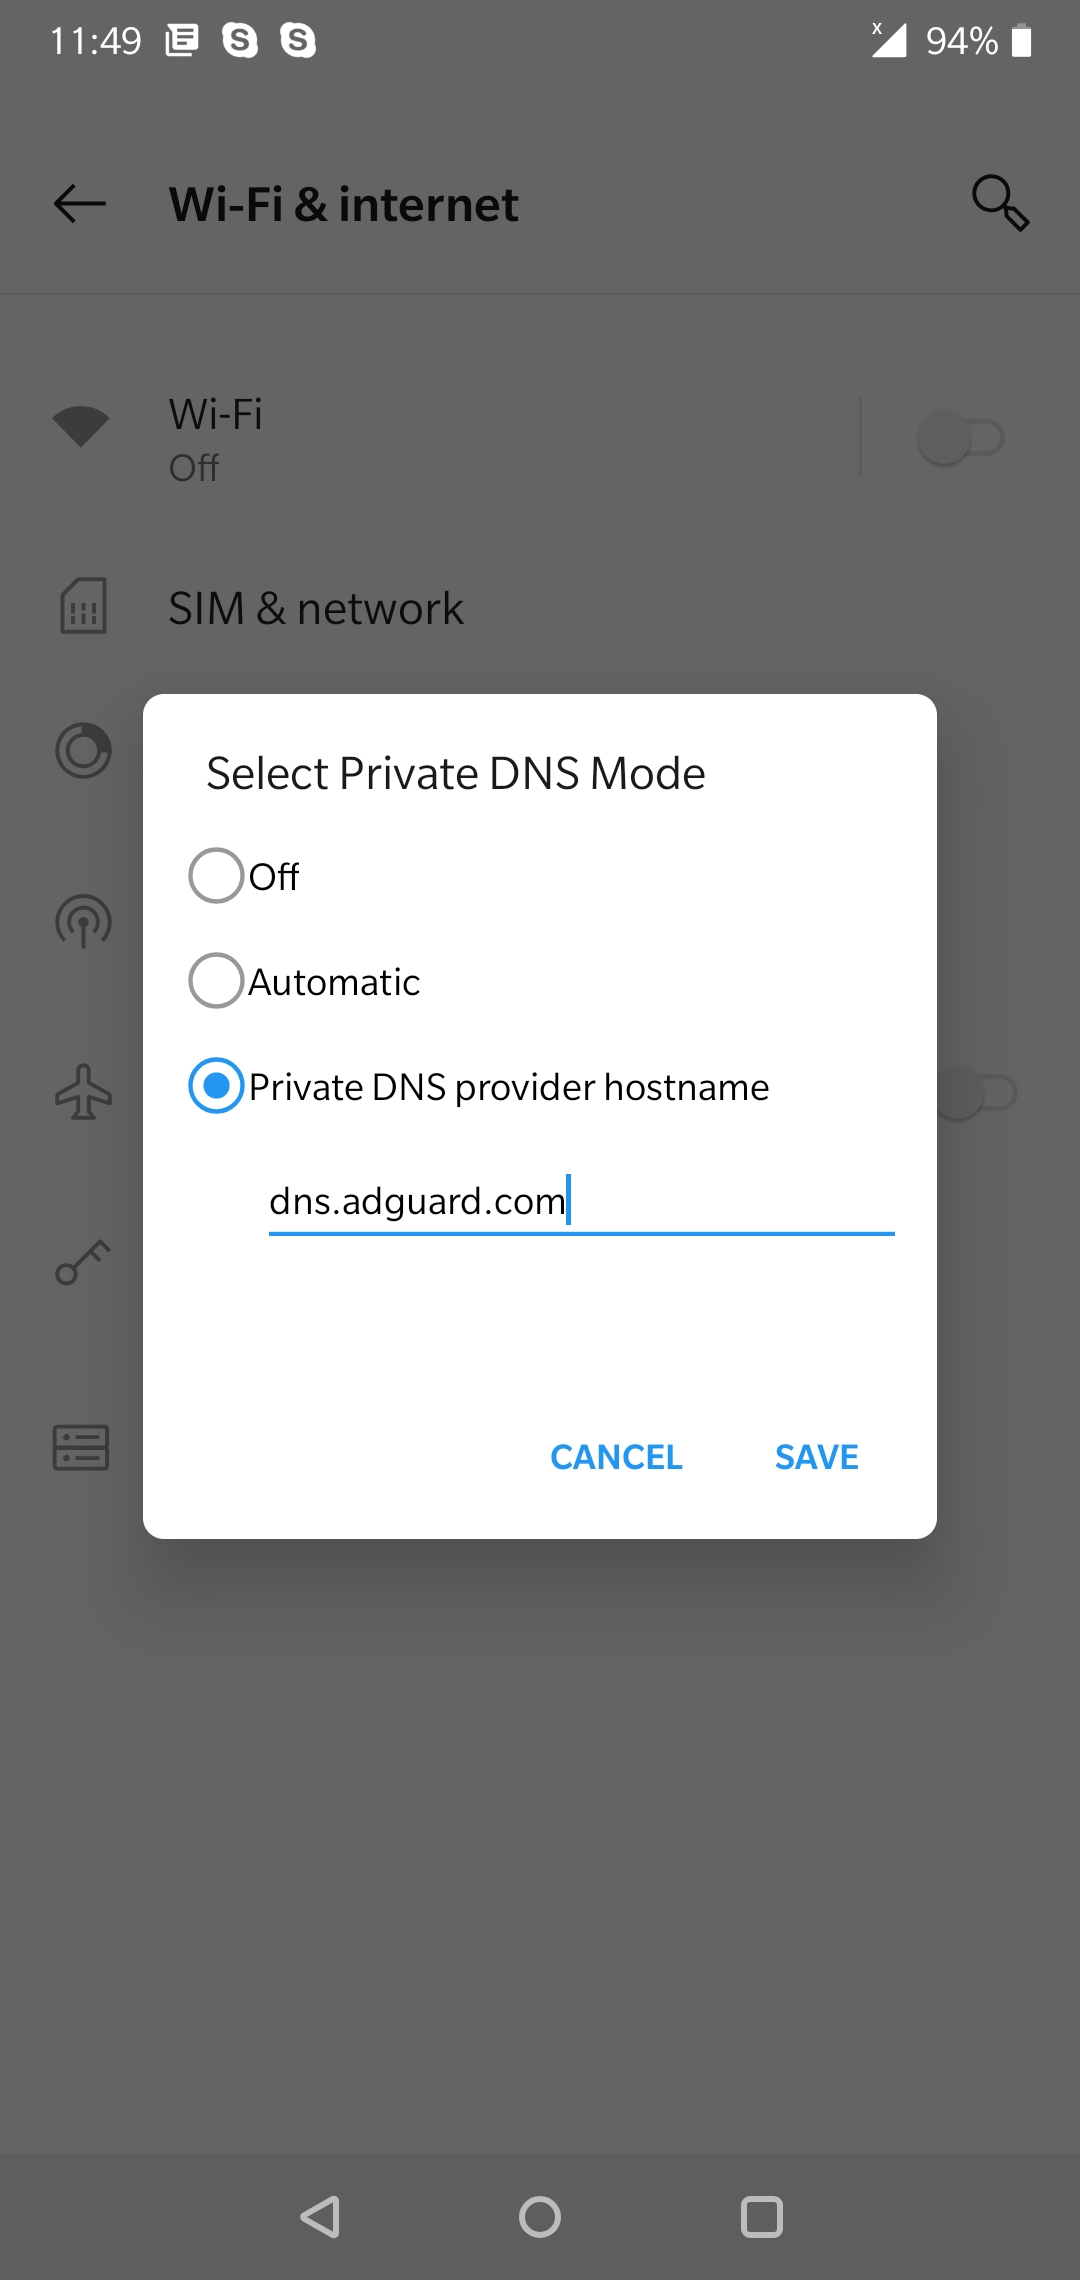 adguard dns issues